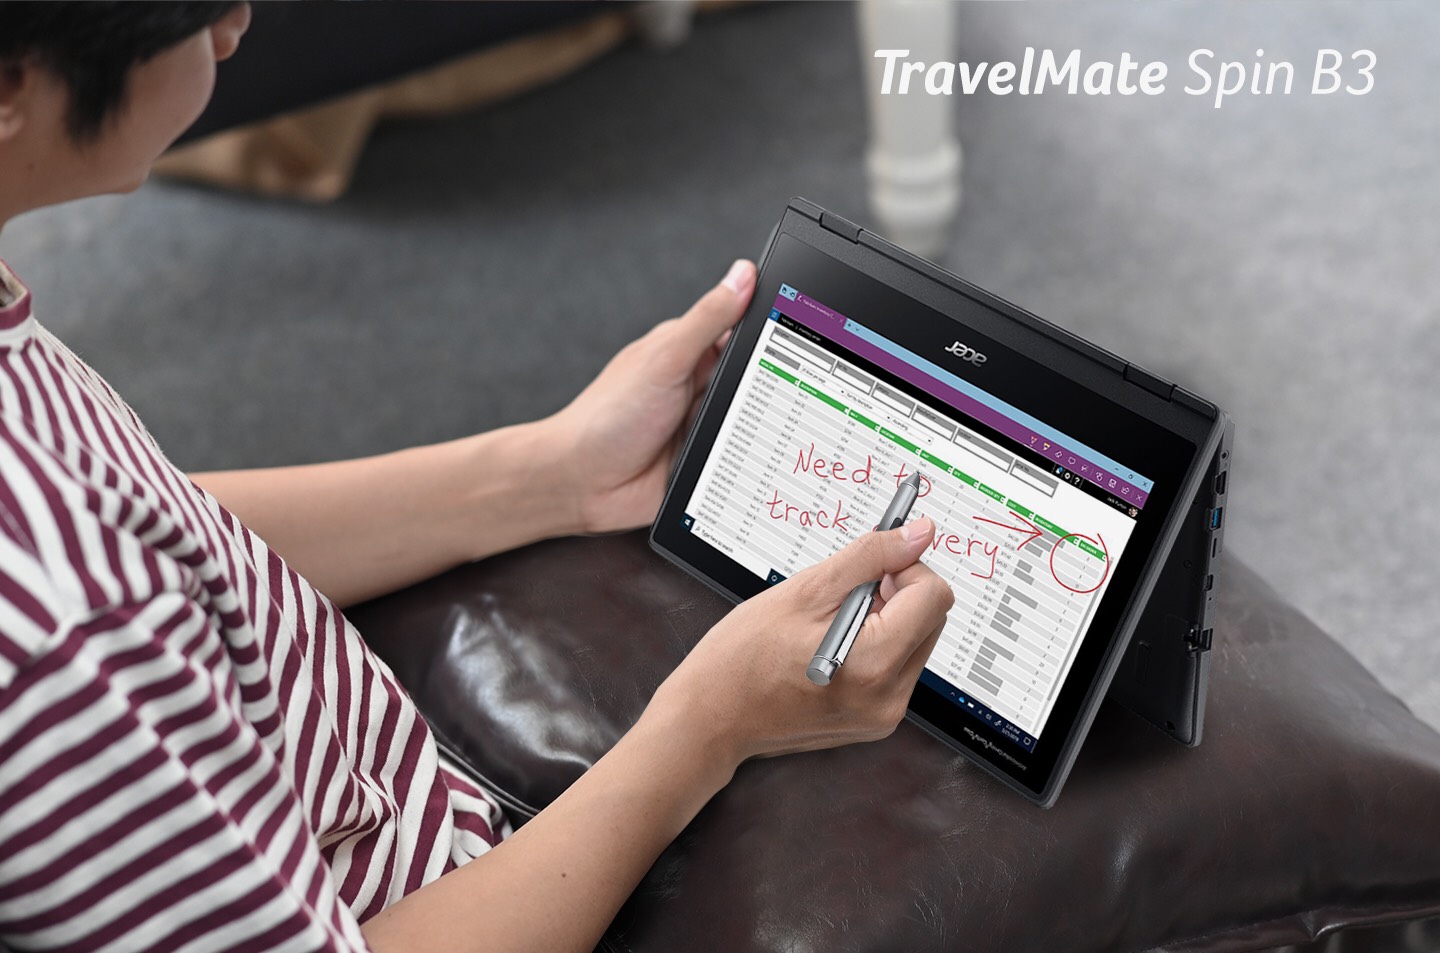 Acer-TravelMate-Spin-B3-image